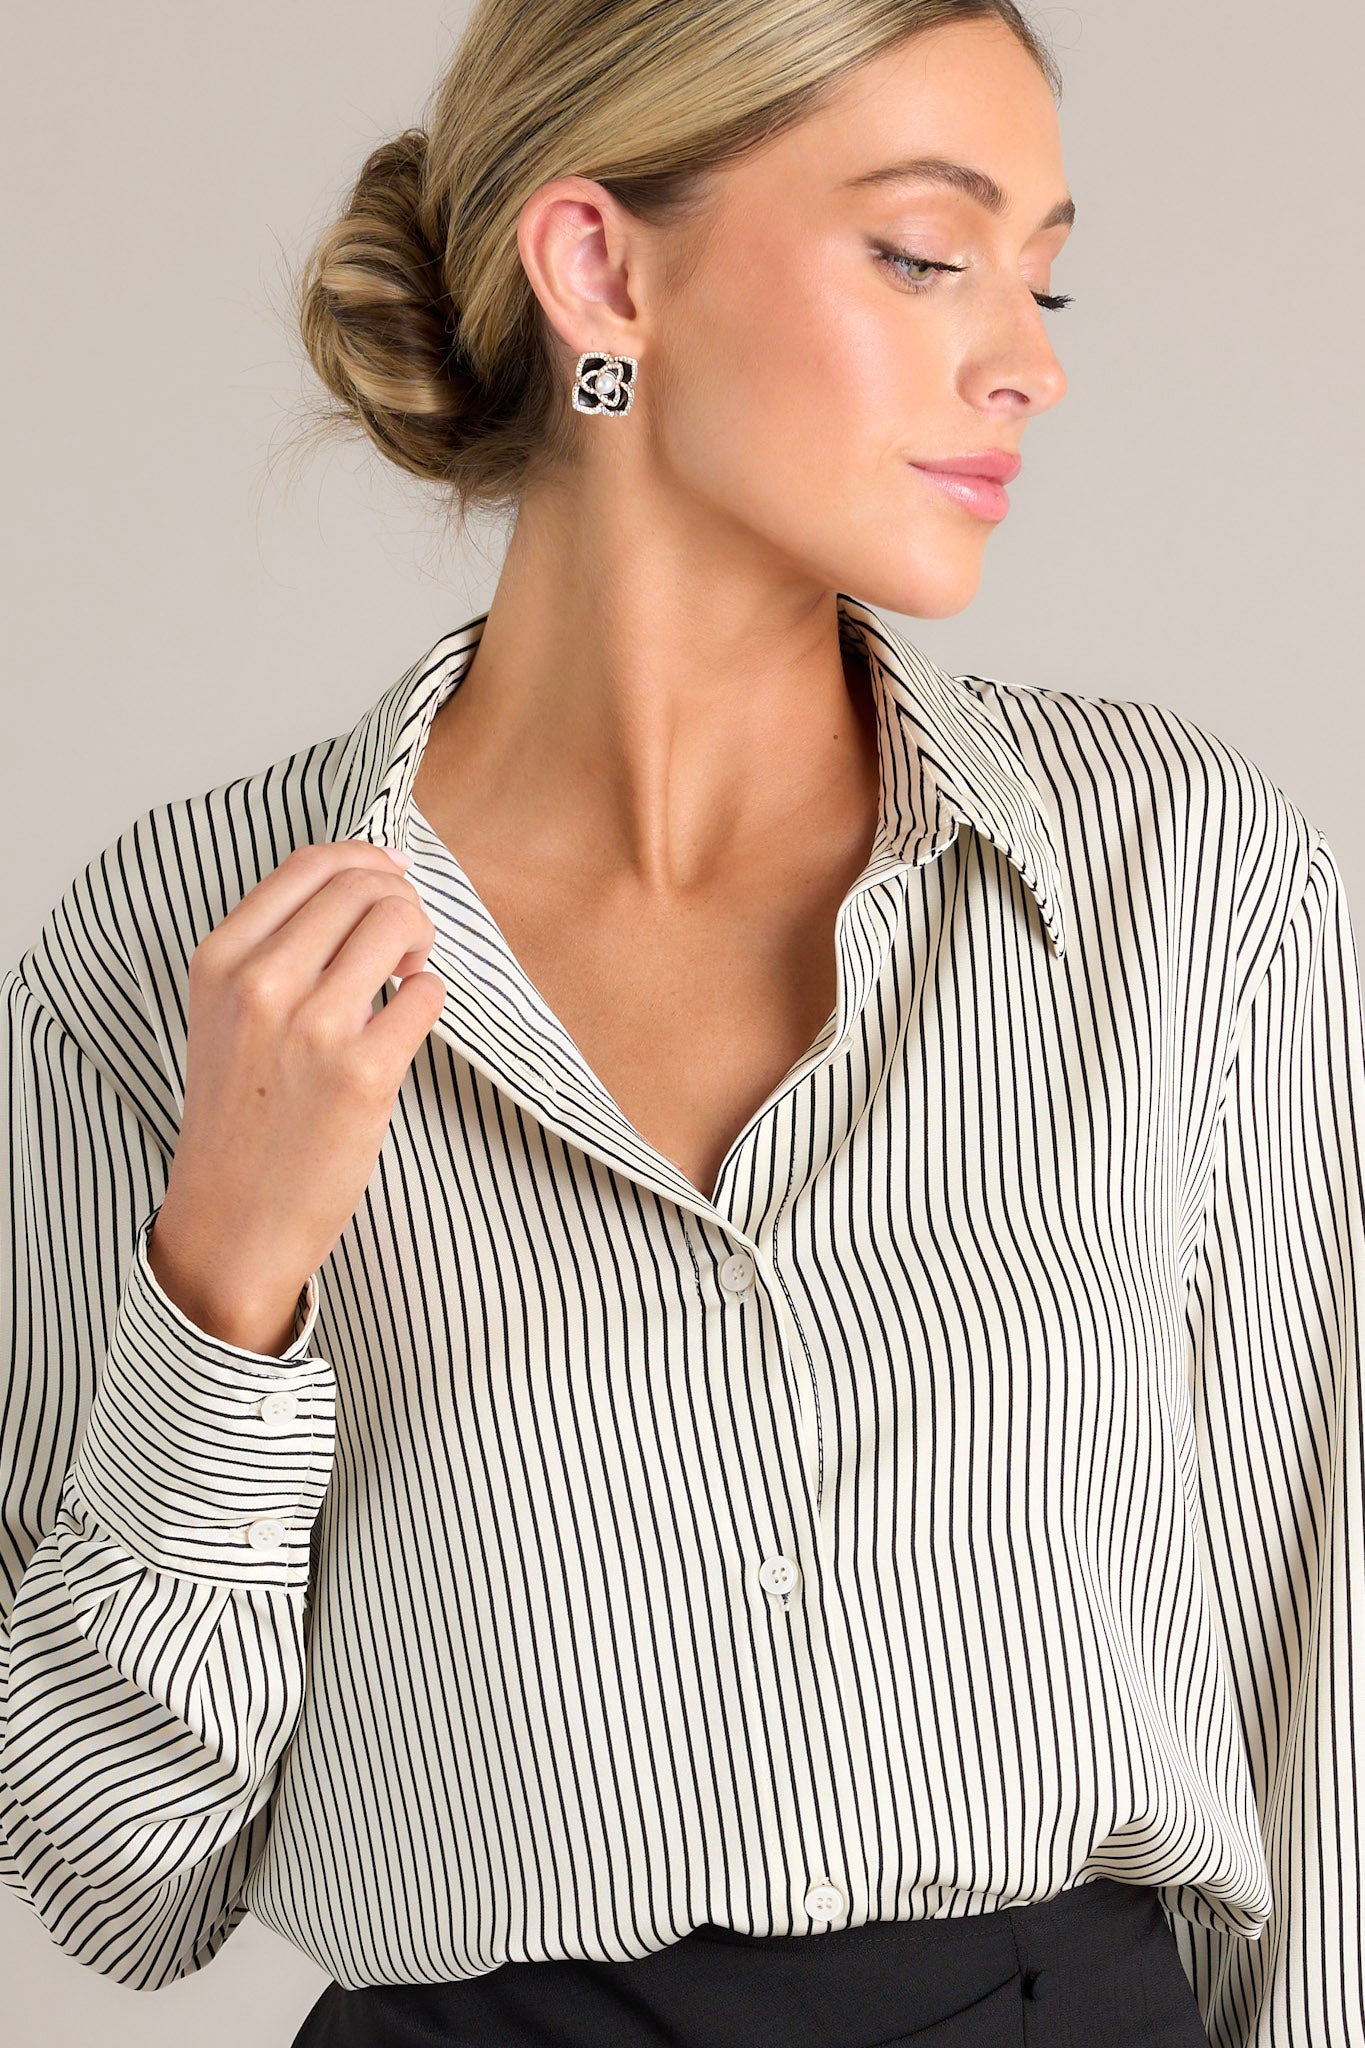 Front view of this fully tucked in white & black top that features a collared neckline, buttons down the front, buttons at the cuff, and a classic relaxed fit.